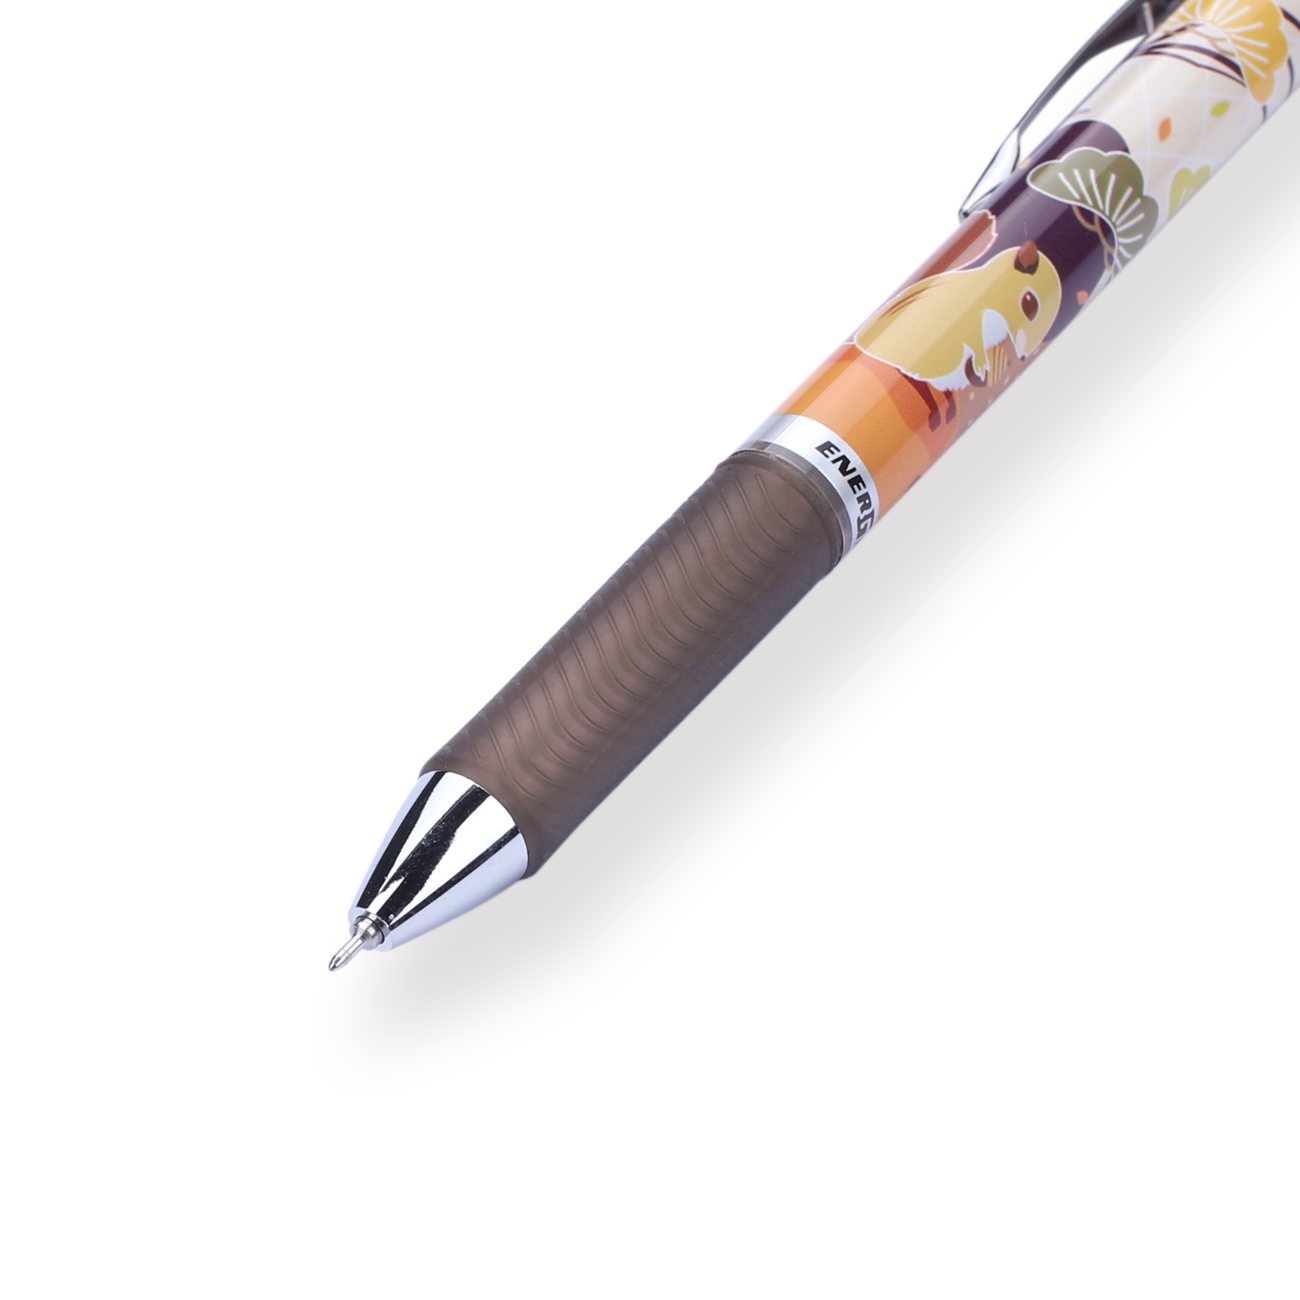 Pentel EnerGel Fall-themed Limited Edition Gel Pen - 0.5 mm - Brown Grip - Stationery Pal